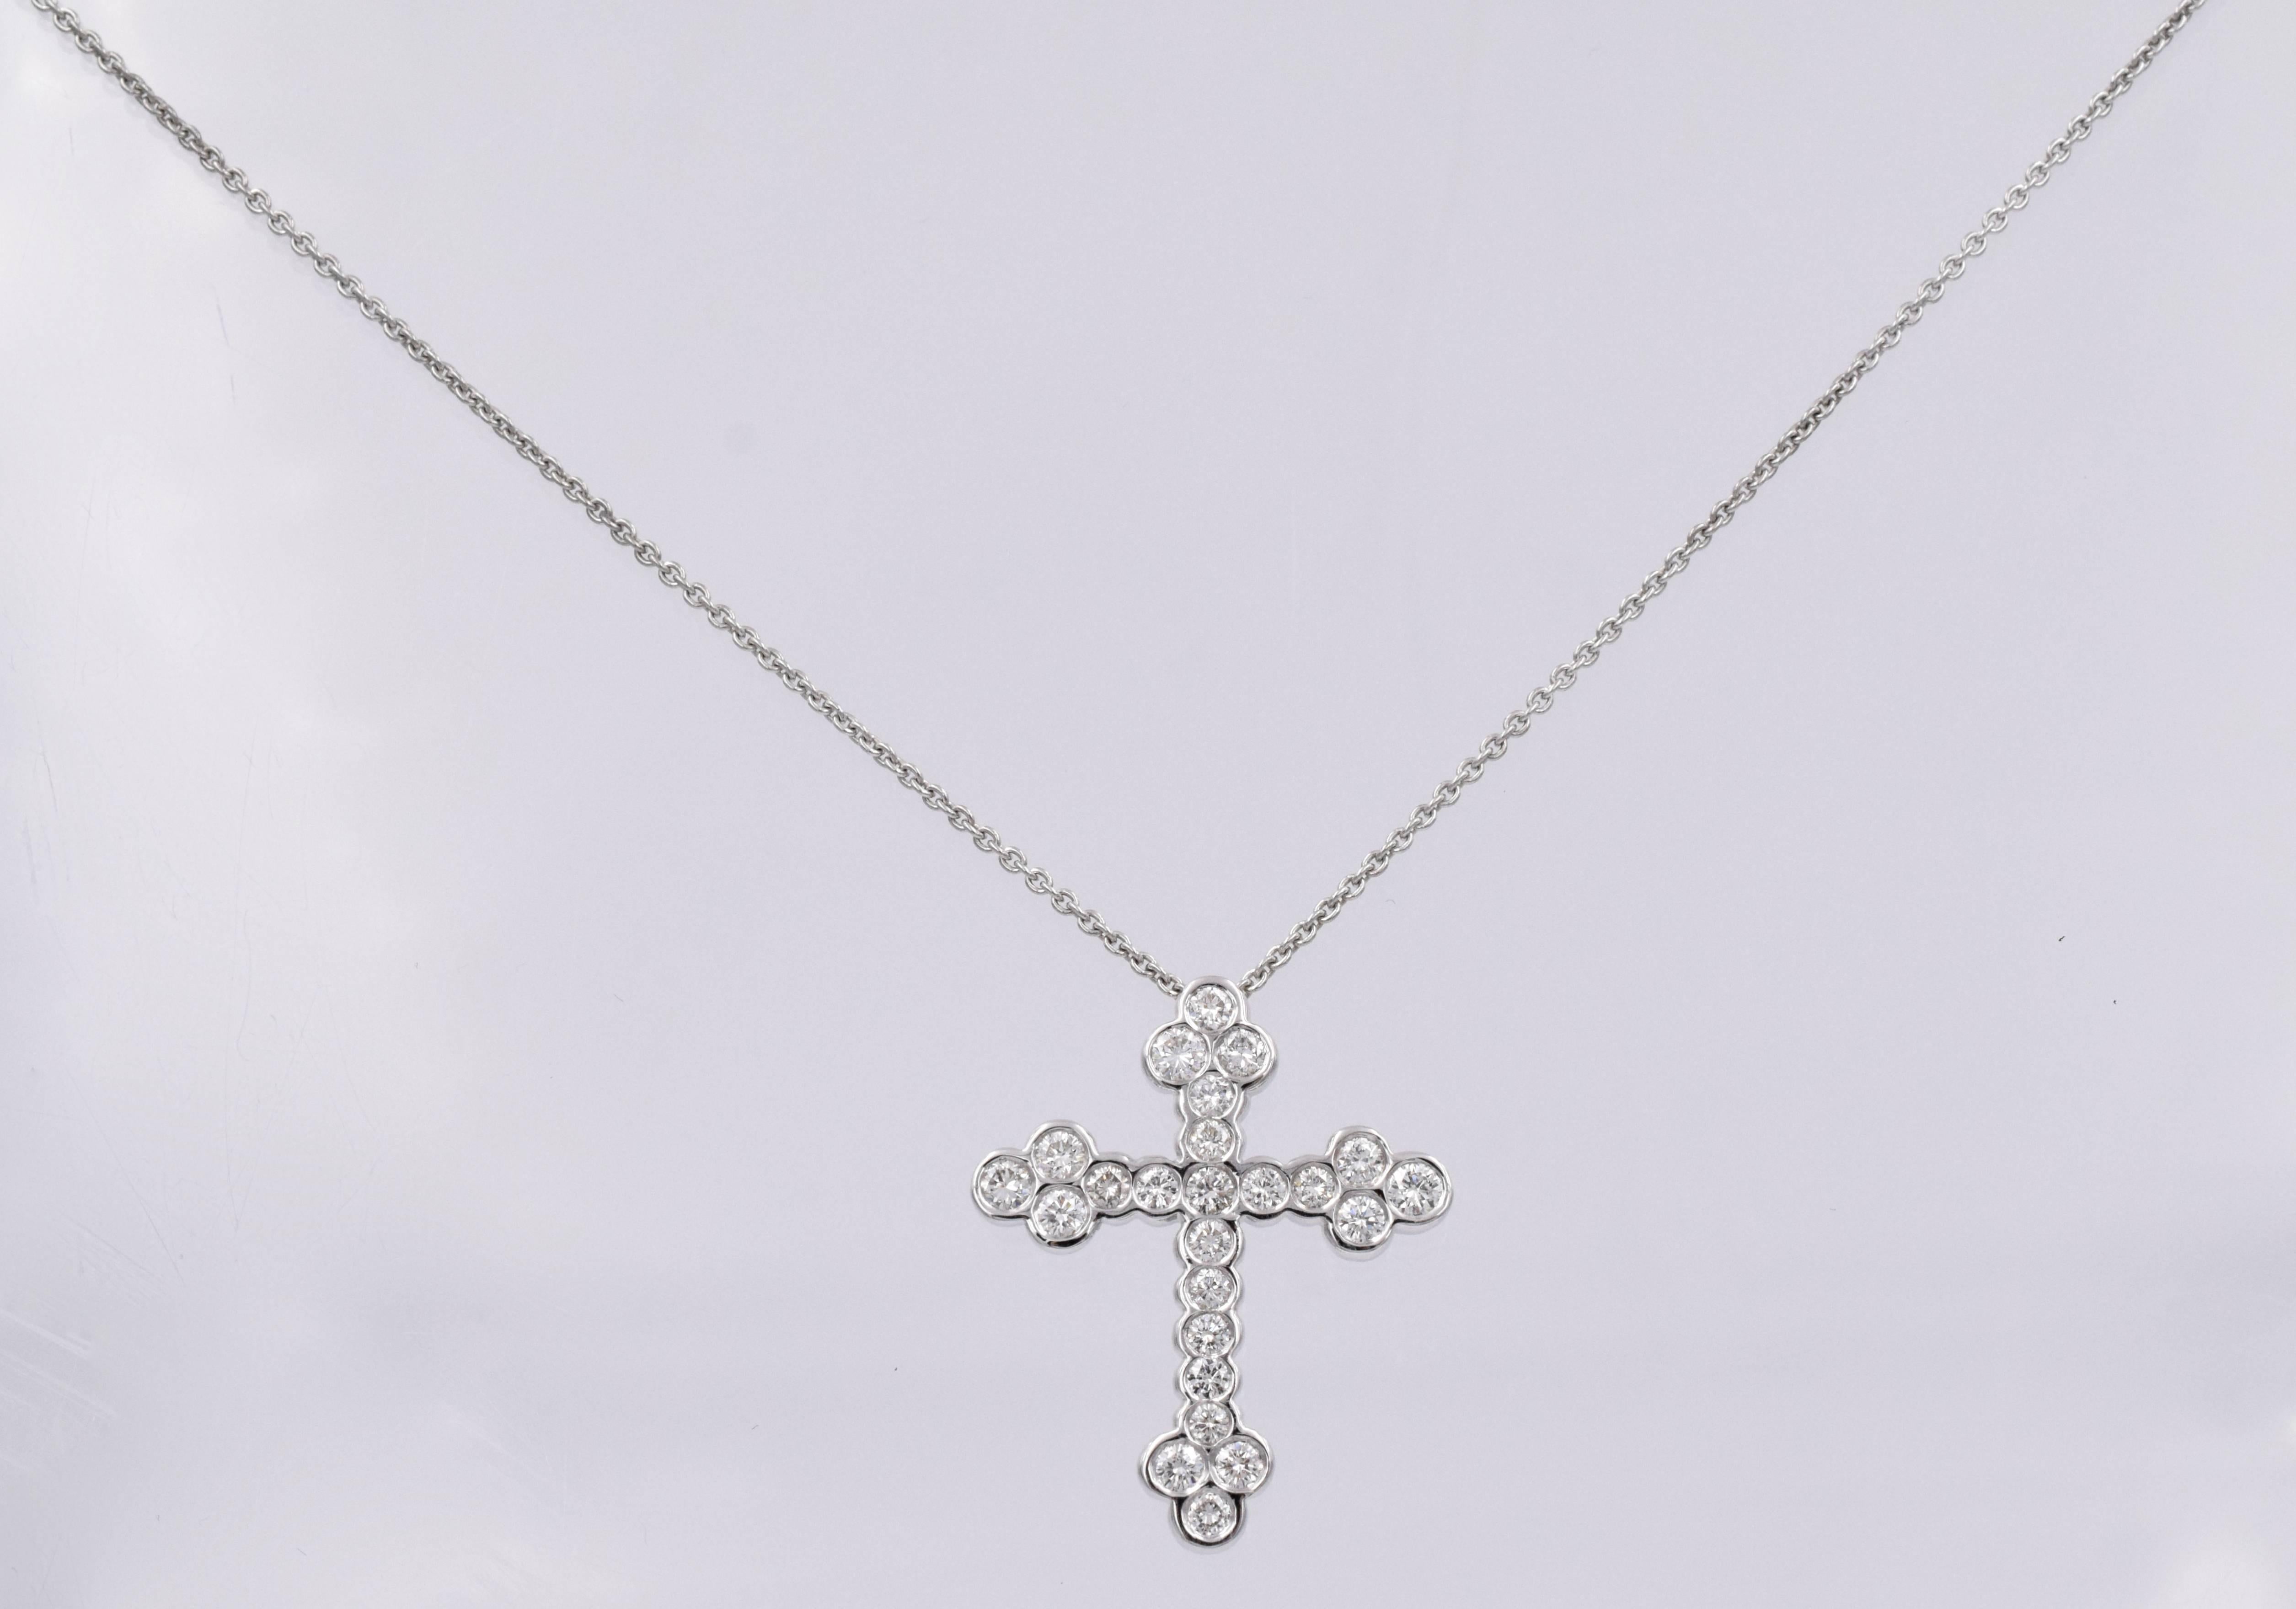 Diamond cross with24 brilliant diamonds set in 18k white gold.  with total weight of 1.8 carats, fine color & clarity diamonds (G-VS)
20 inch long chain with lobster clasp